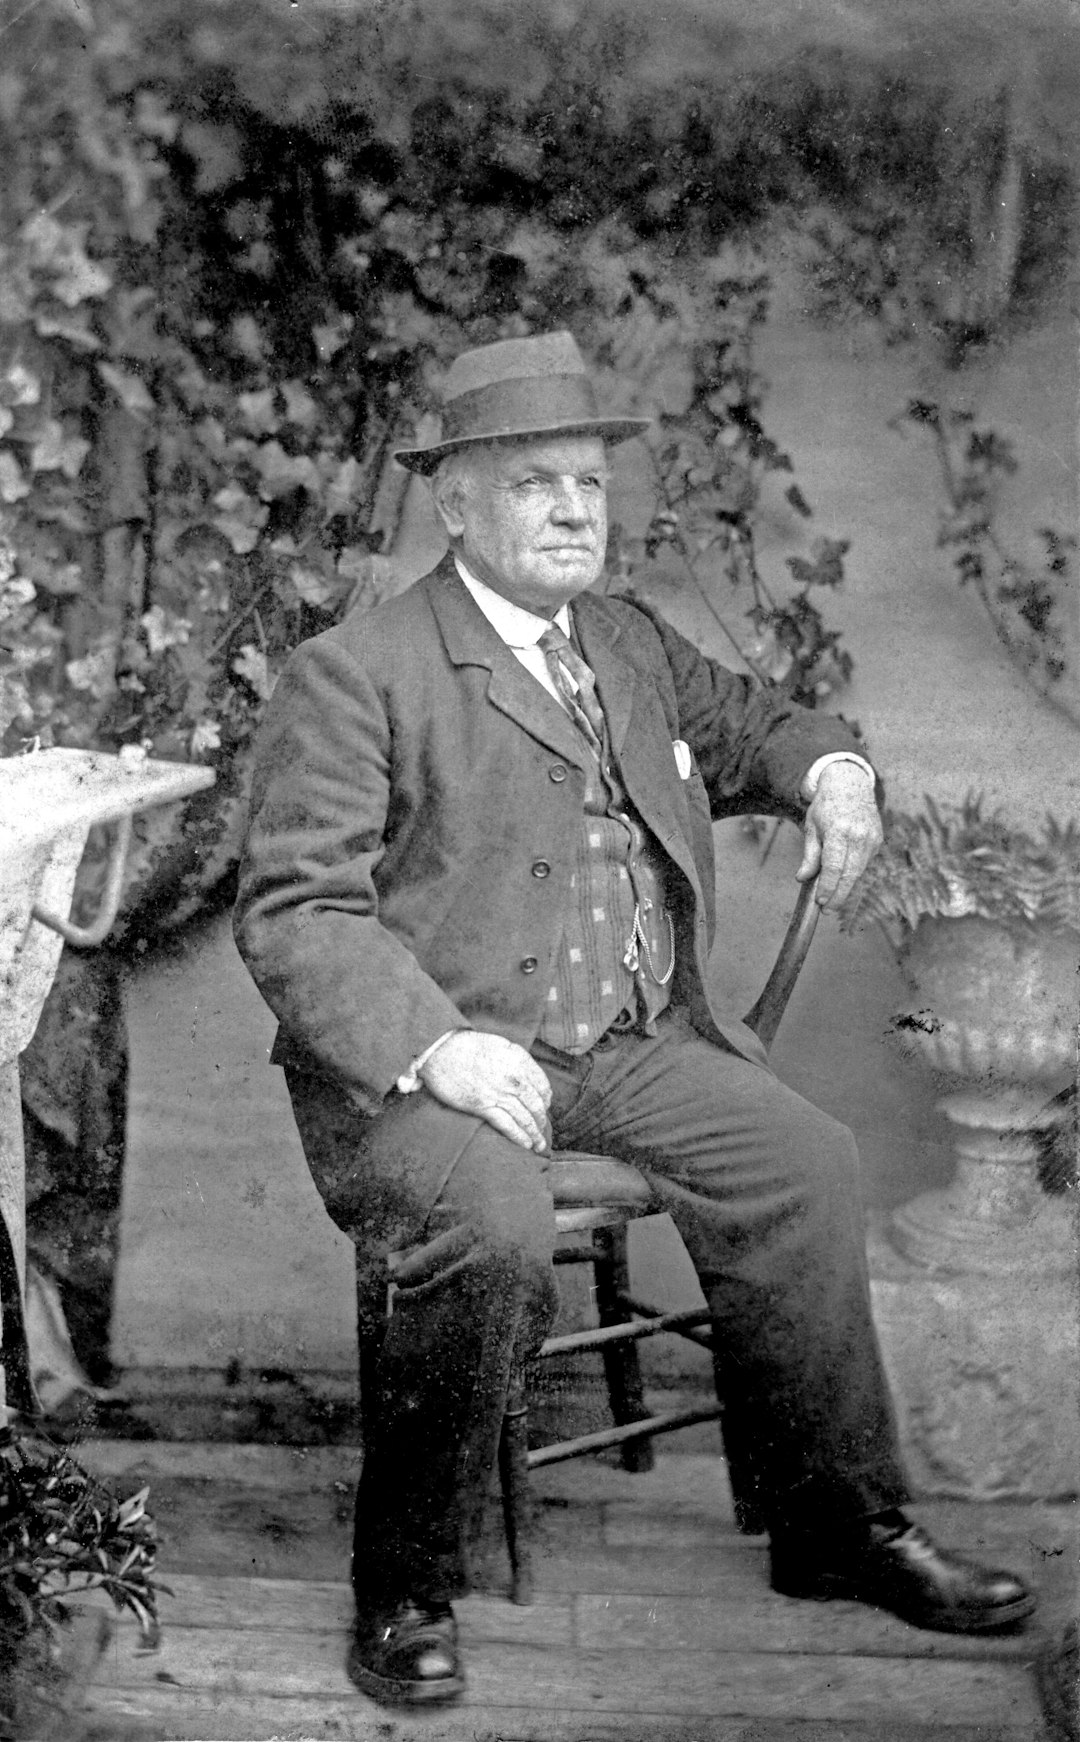 man in black suit sitting on chair